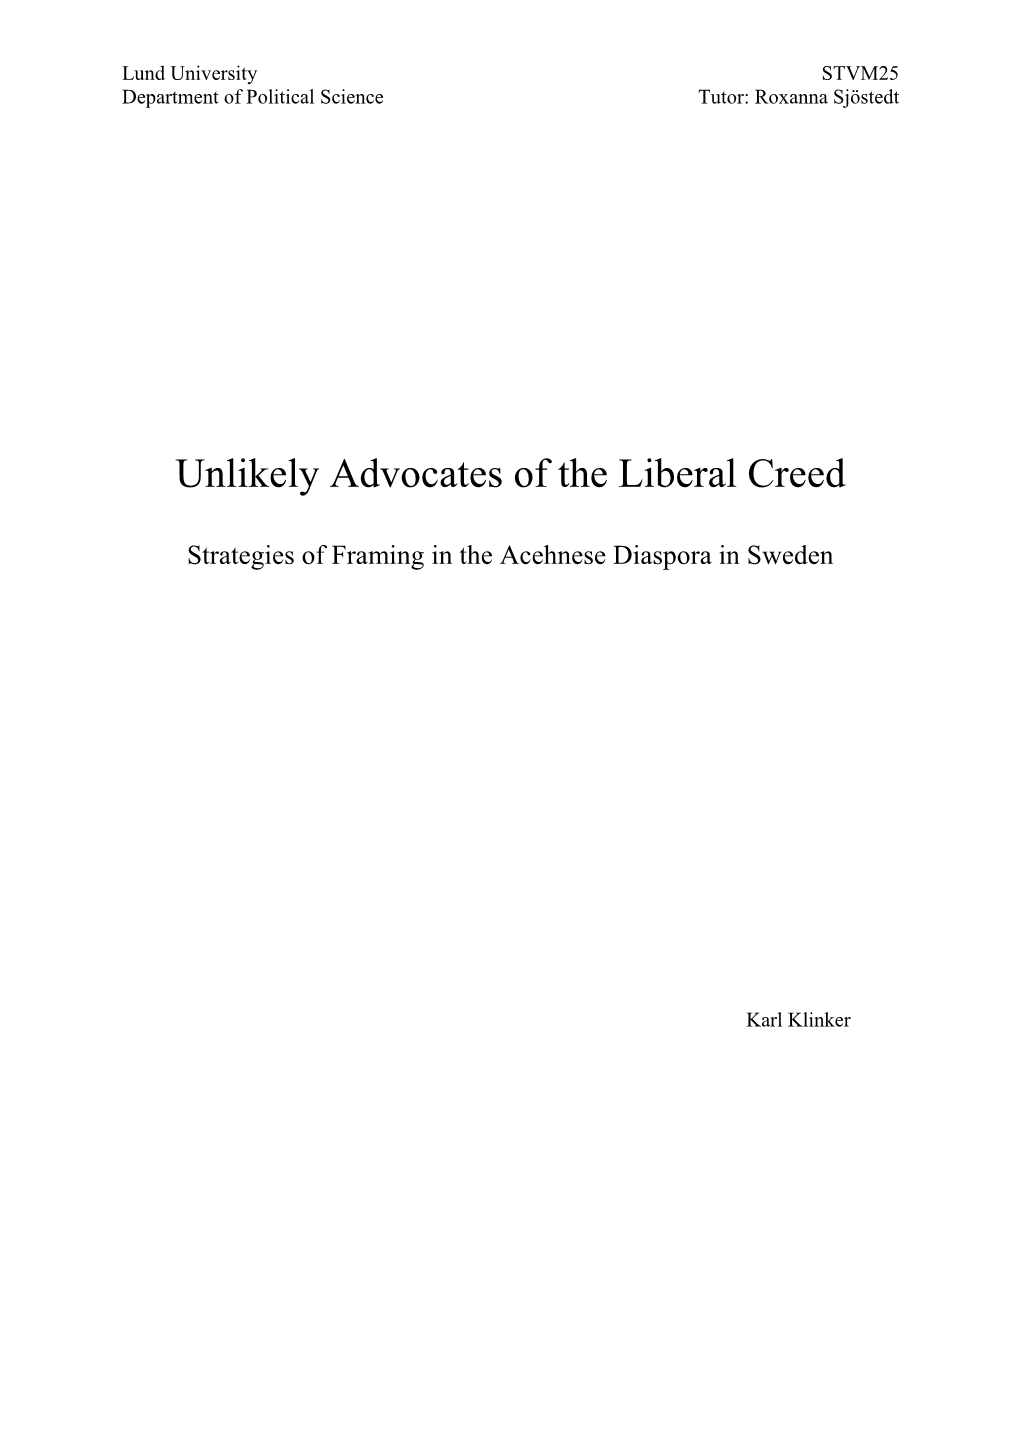 Unlikely Advocates of the Liberal Creed